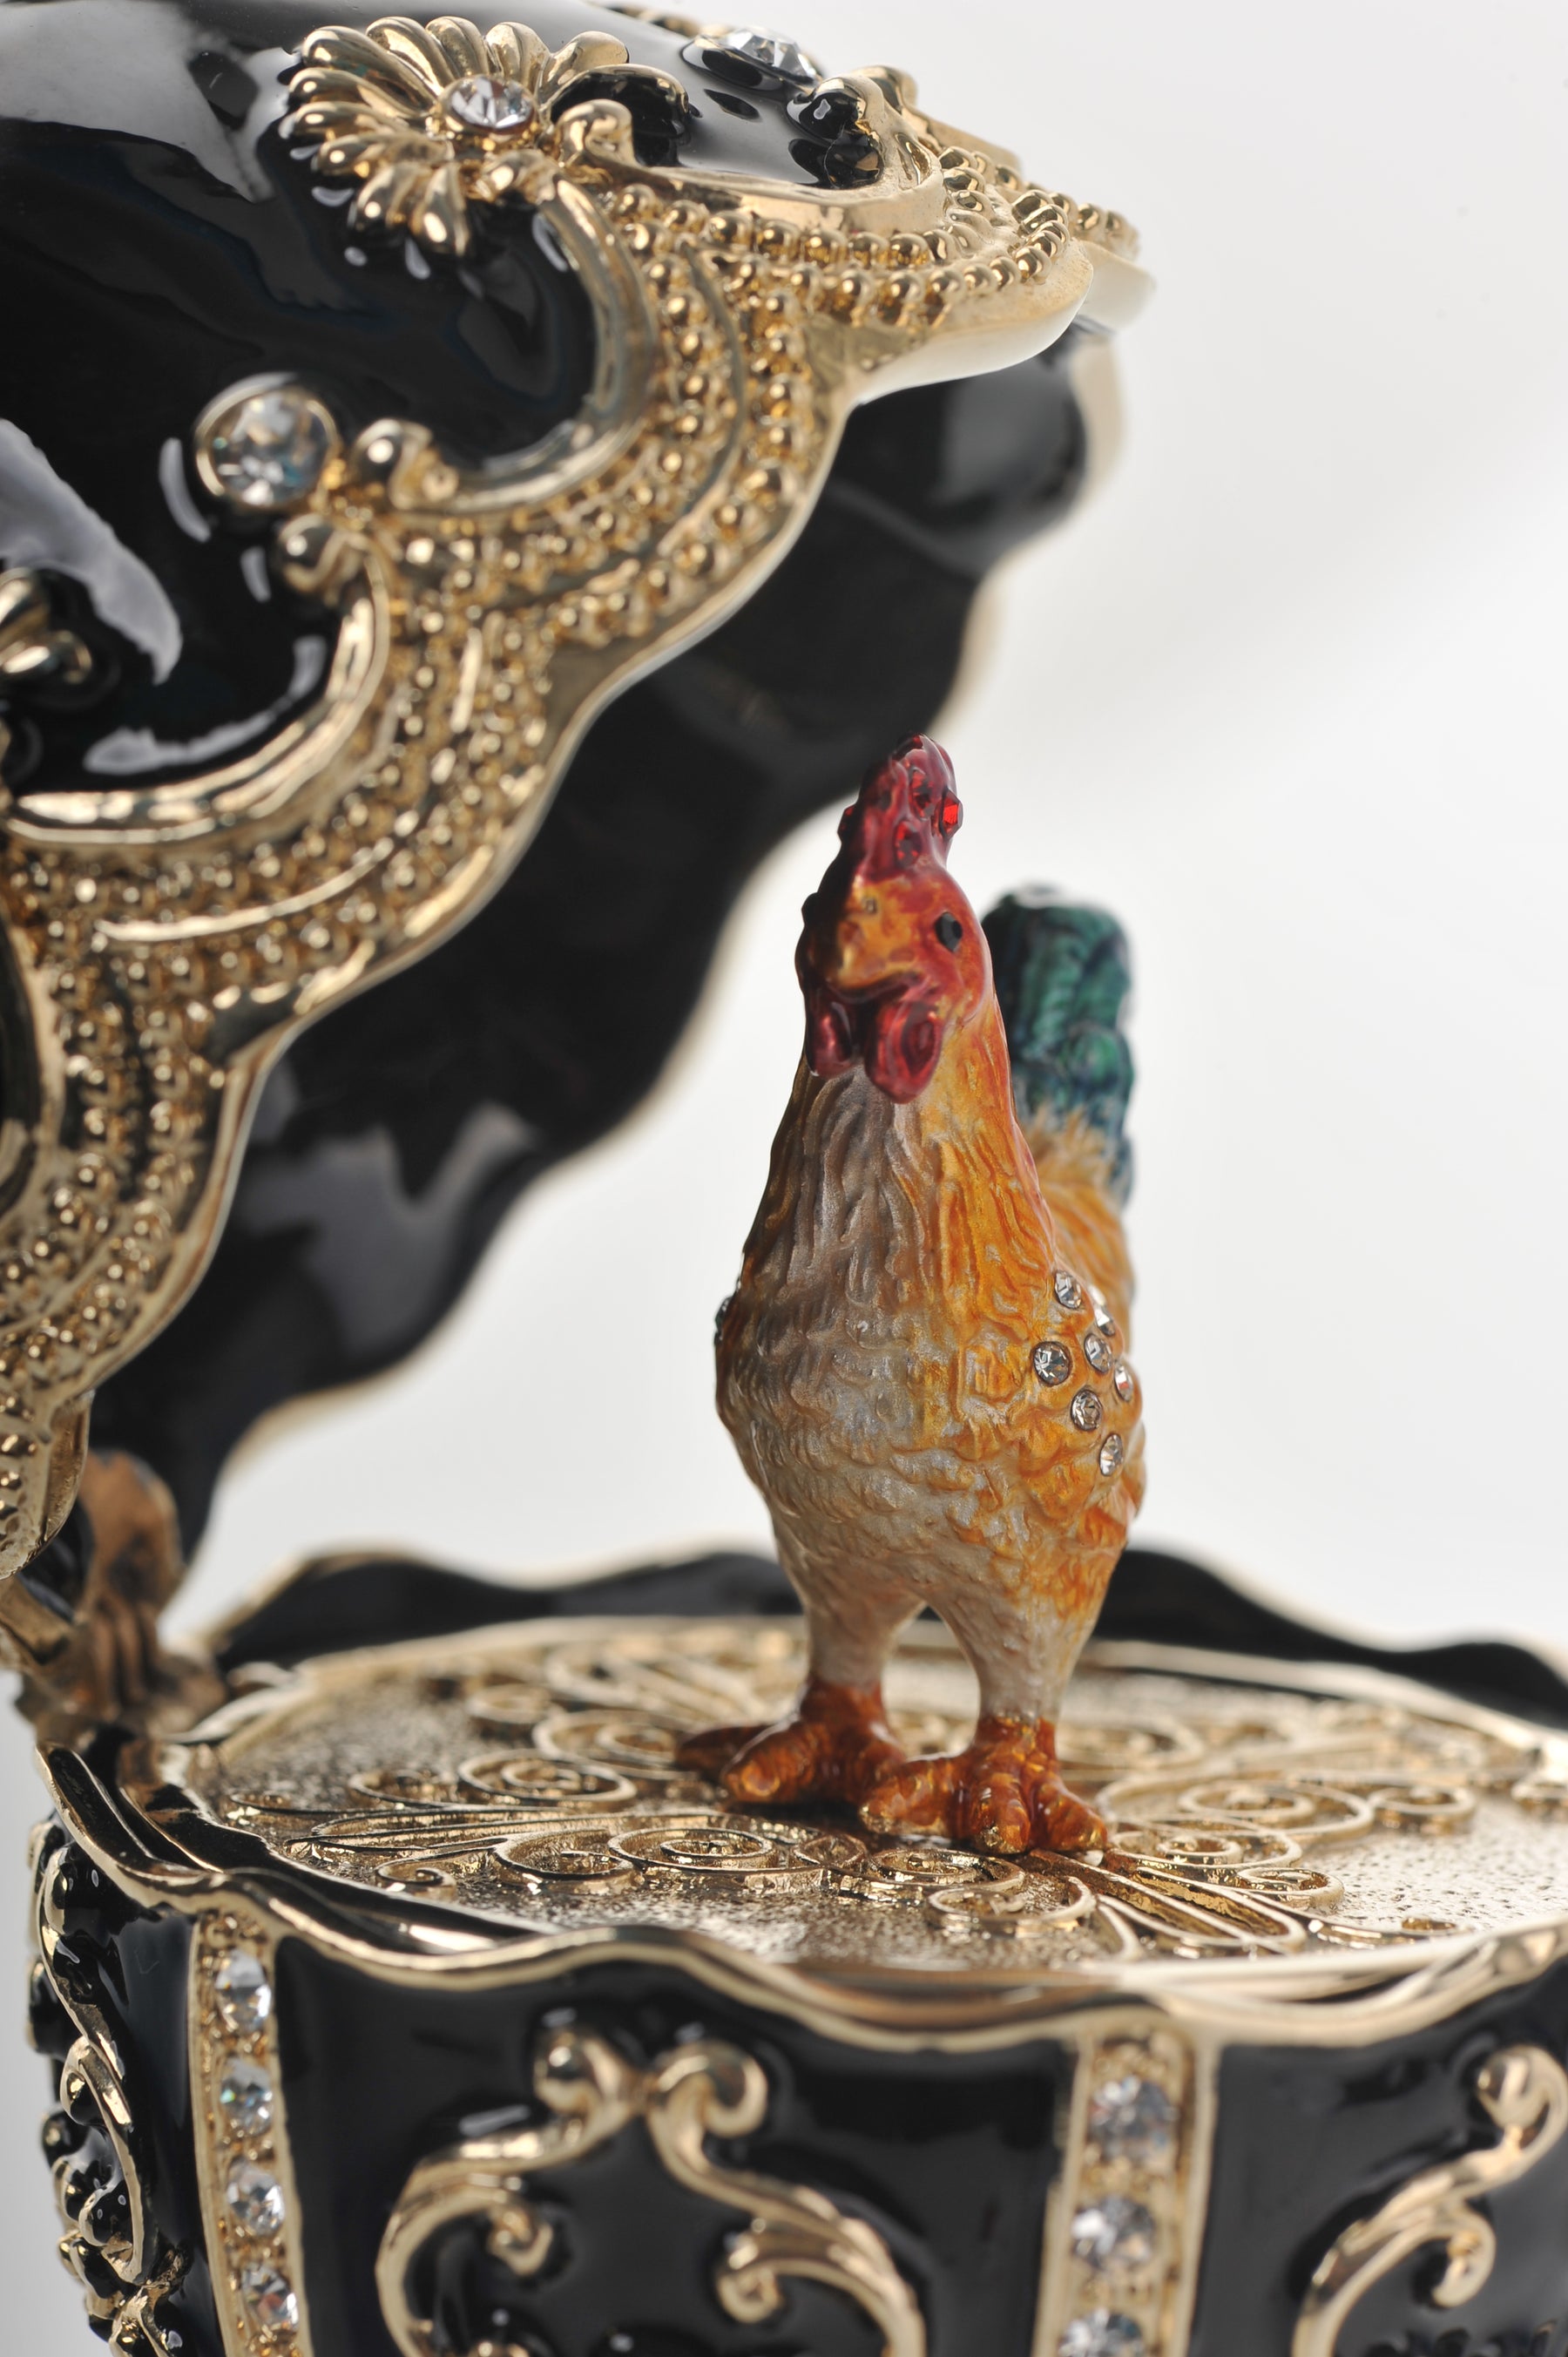 Black Faberge Egg with a Chicken Inside